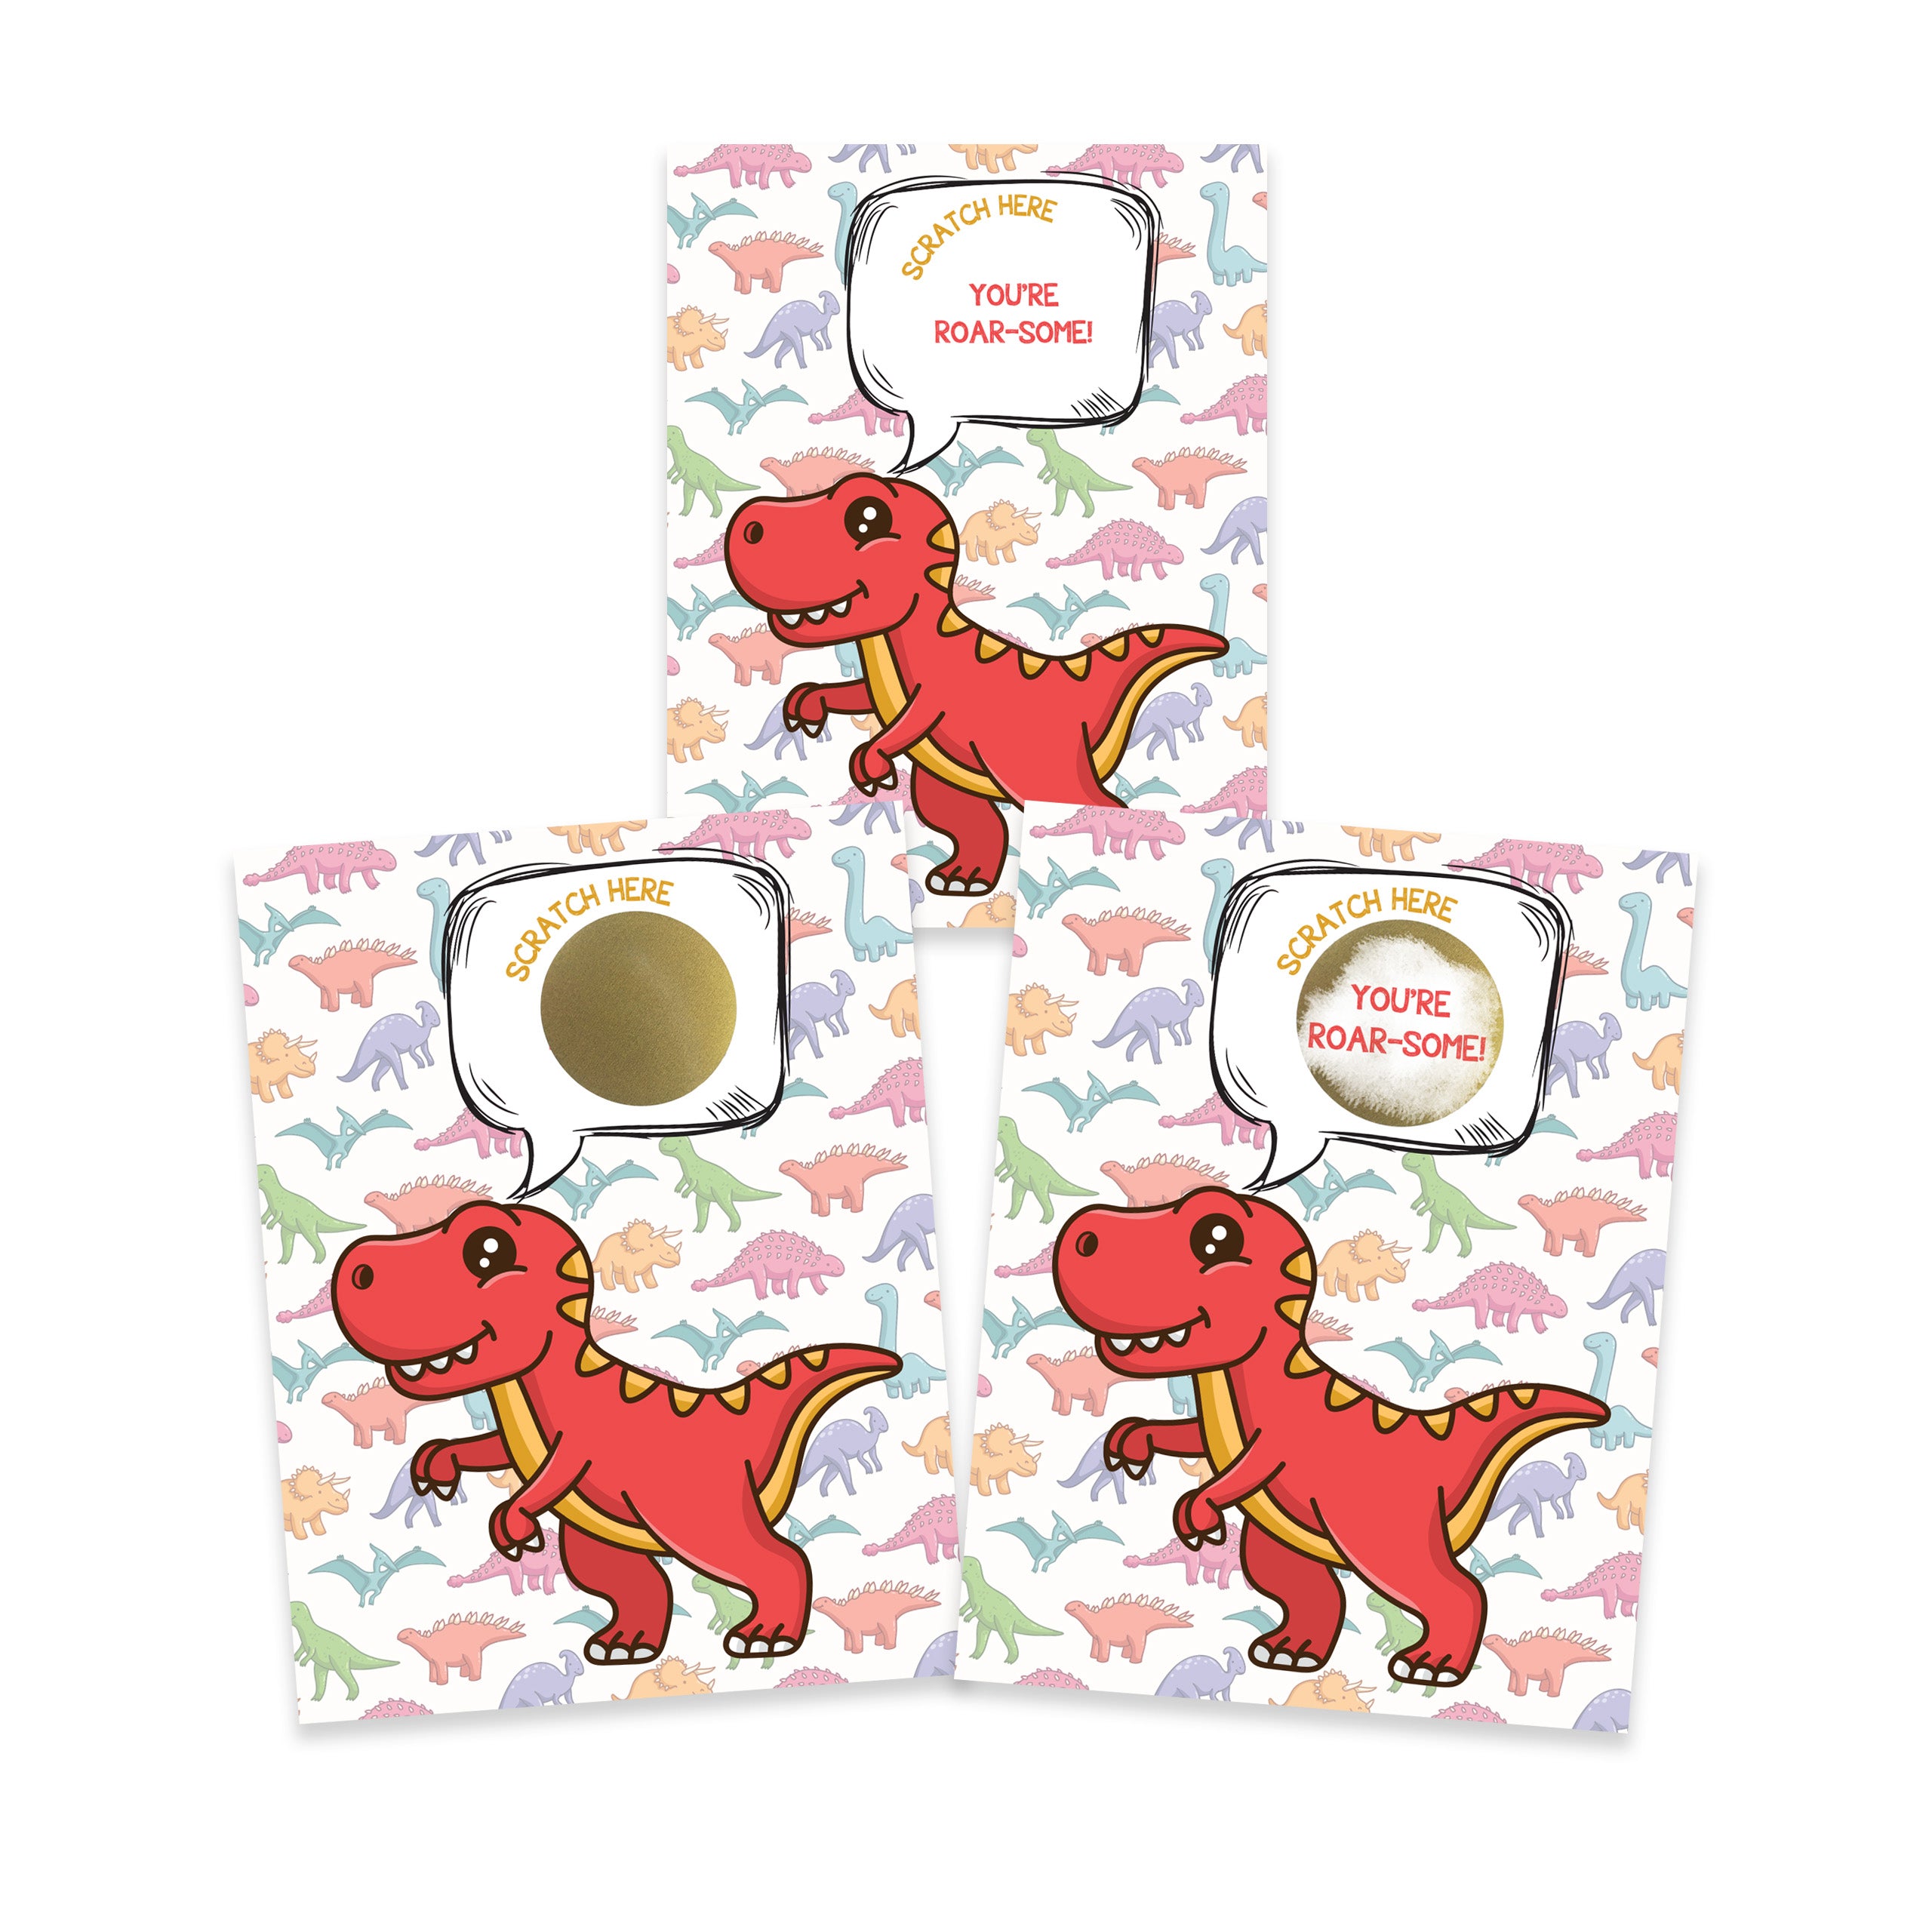 Dino Dinosaur Scratch Off Valentine's Day Classroom Party Favor Kit of 25 Cards 3x4